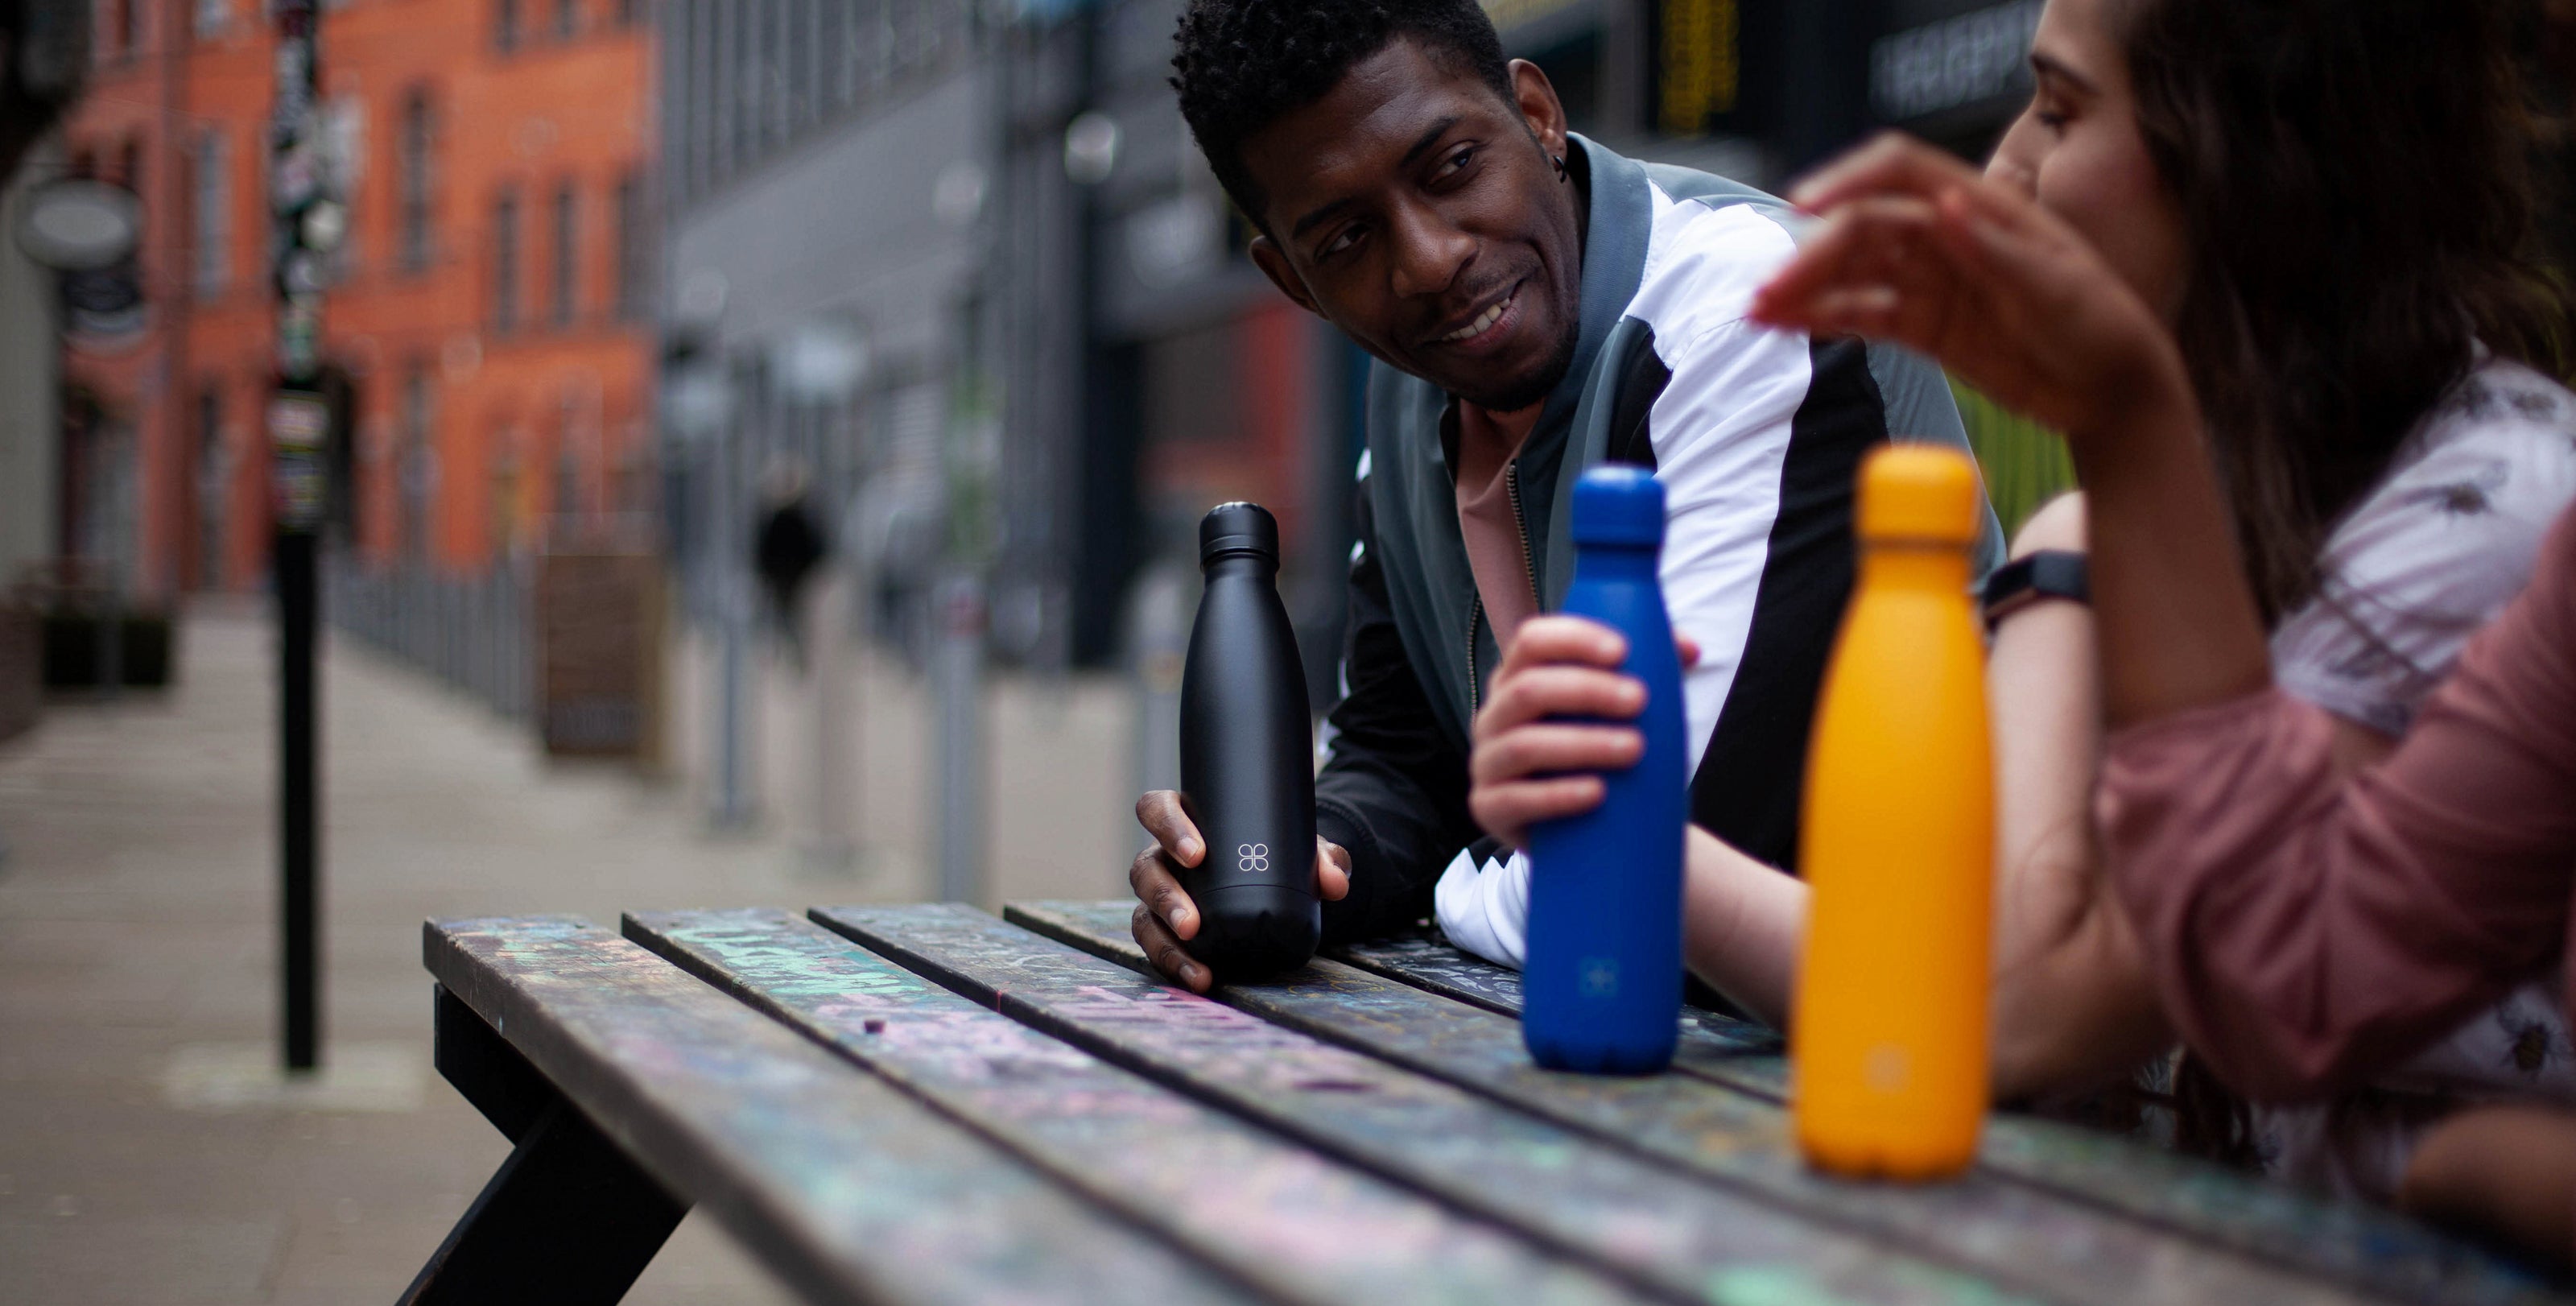 Group of friend enjoying a chat with their new water bottles in Birmingham's art district